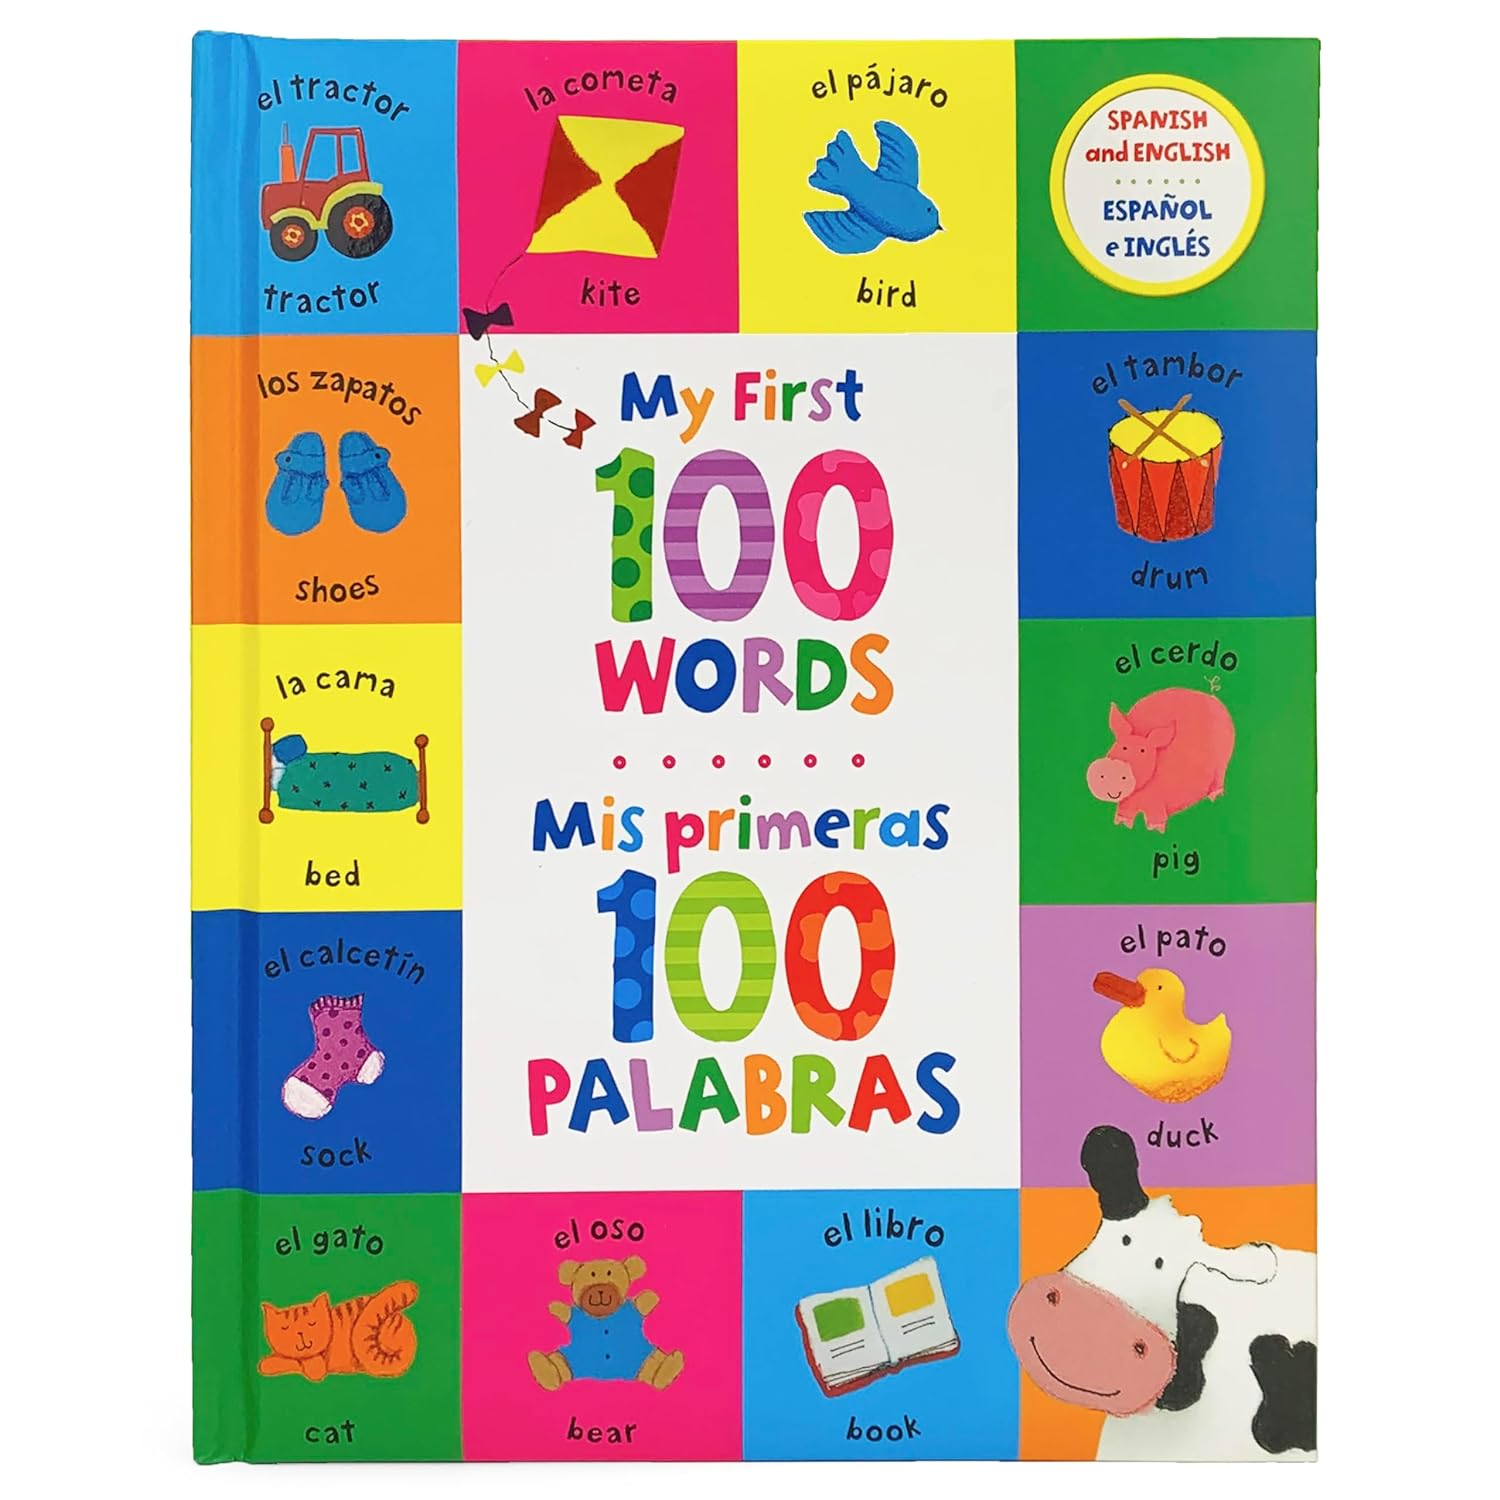 My First 100 Words - Mis Primeras 100 Palabras - English / Spanish First Words Bilingual Book, Ages 1-7 (en español) Hardcover